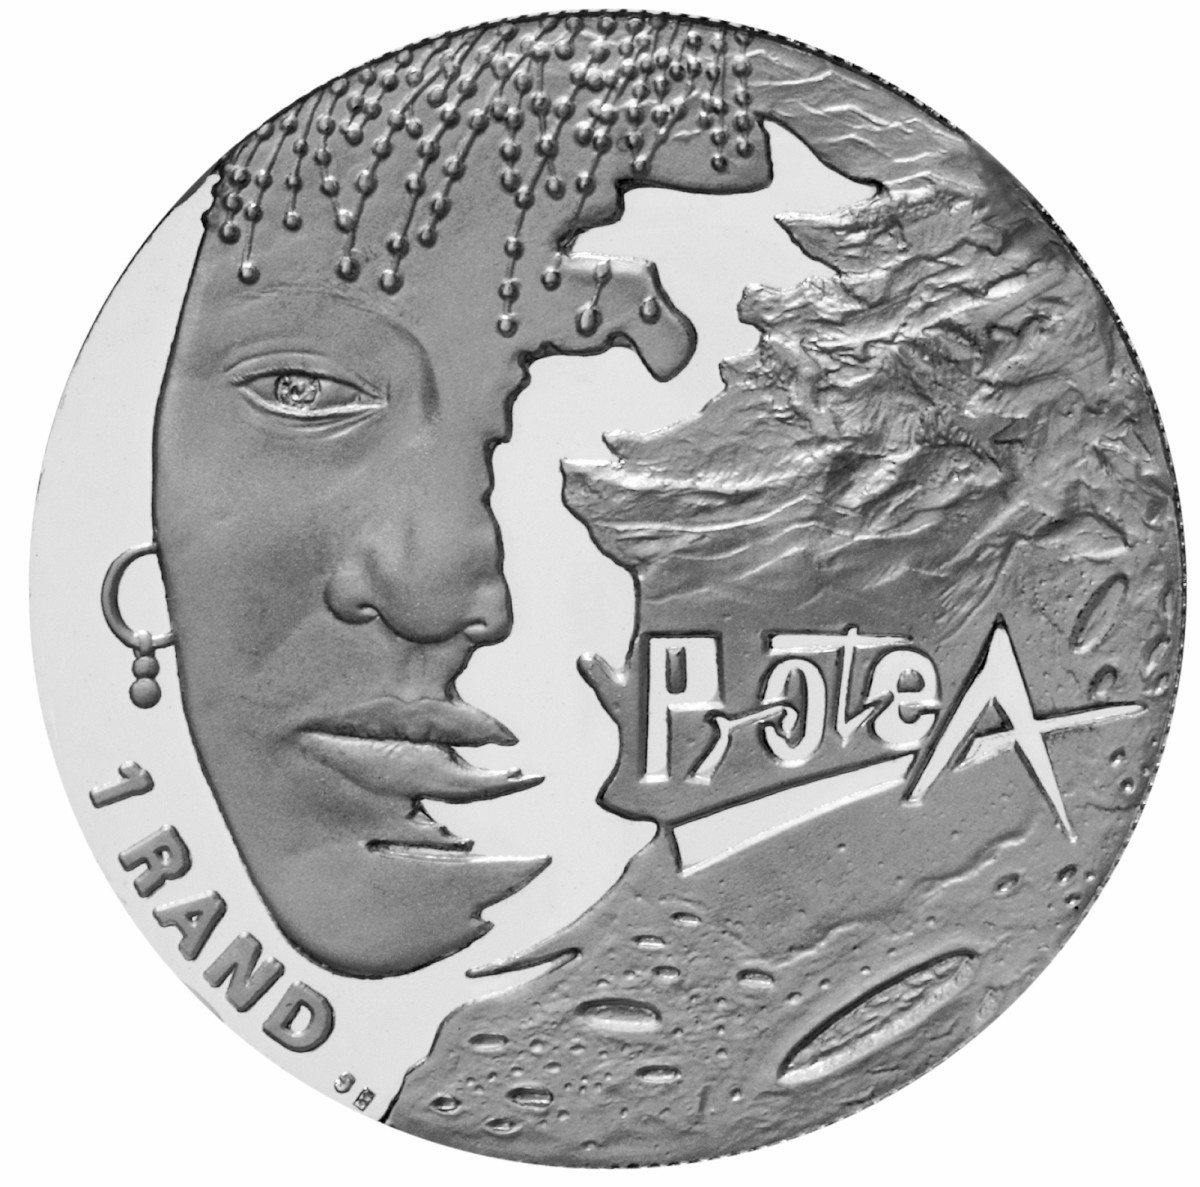 Women of South Africa became a meaningful coin through its poignant theme an emotive design. This coin was Natanya Van Niekerk’s first COTY award winner.